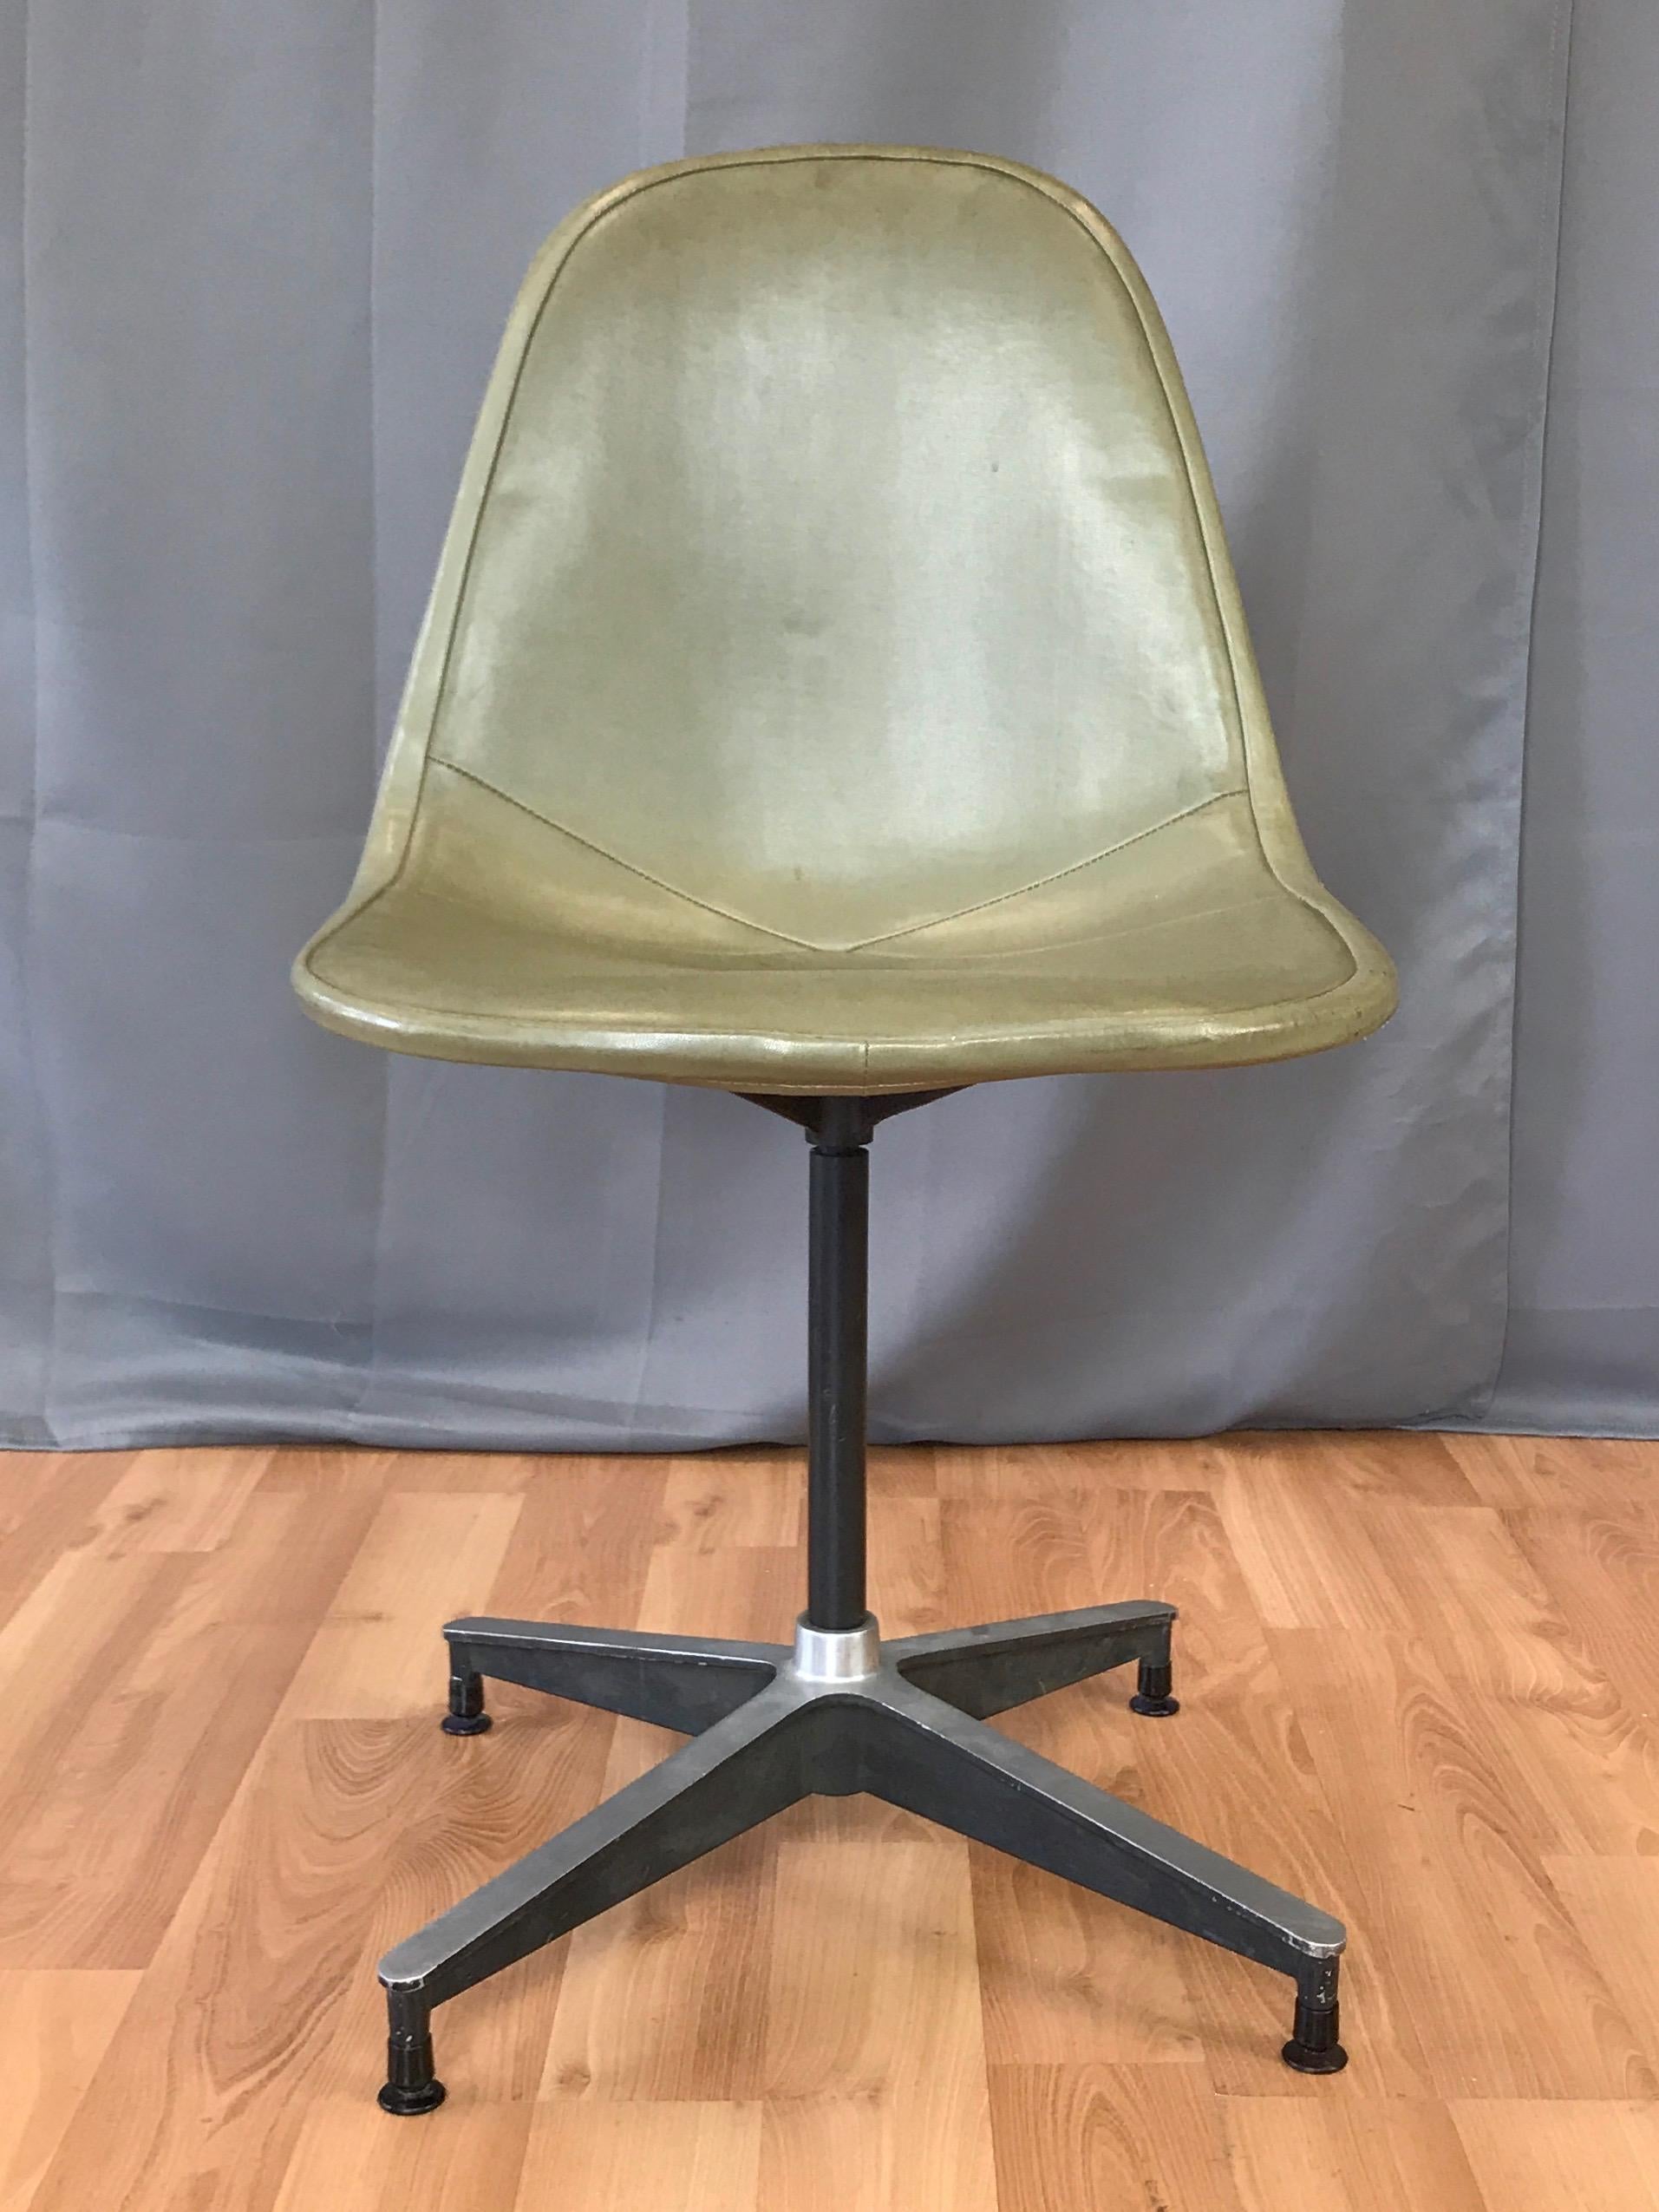 A rare first generation PKC-1 Pivot Wire Side Chair on cast aluminum base with original Naugahyde cover by Charles and Ray Eames for Herman Miller.

Iconic four-point 